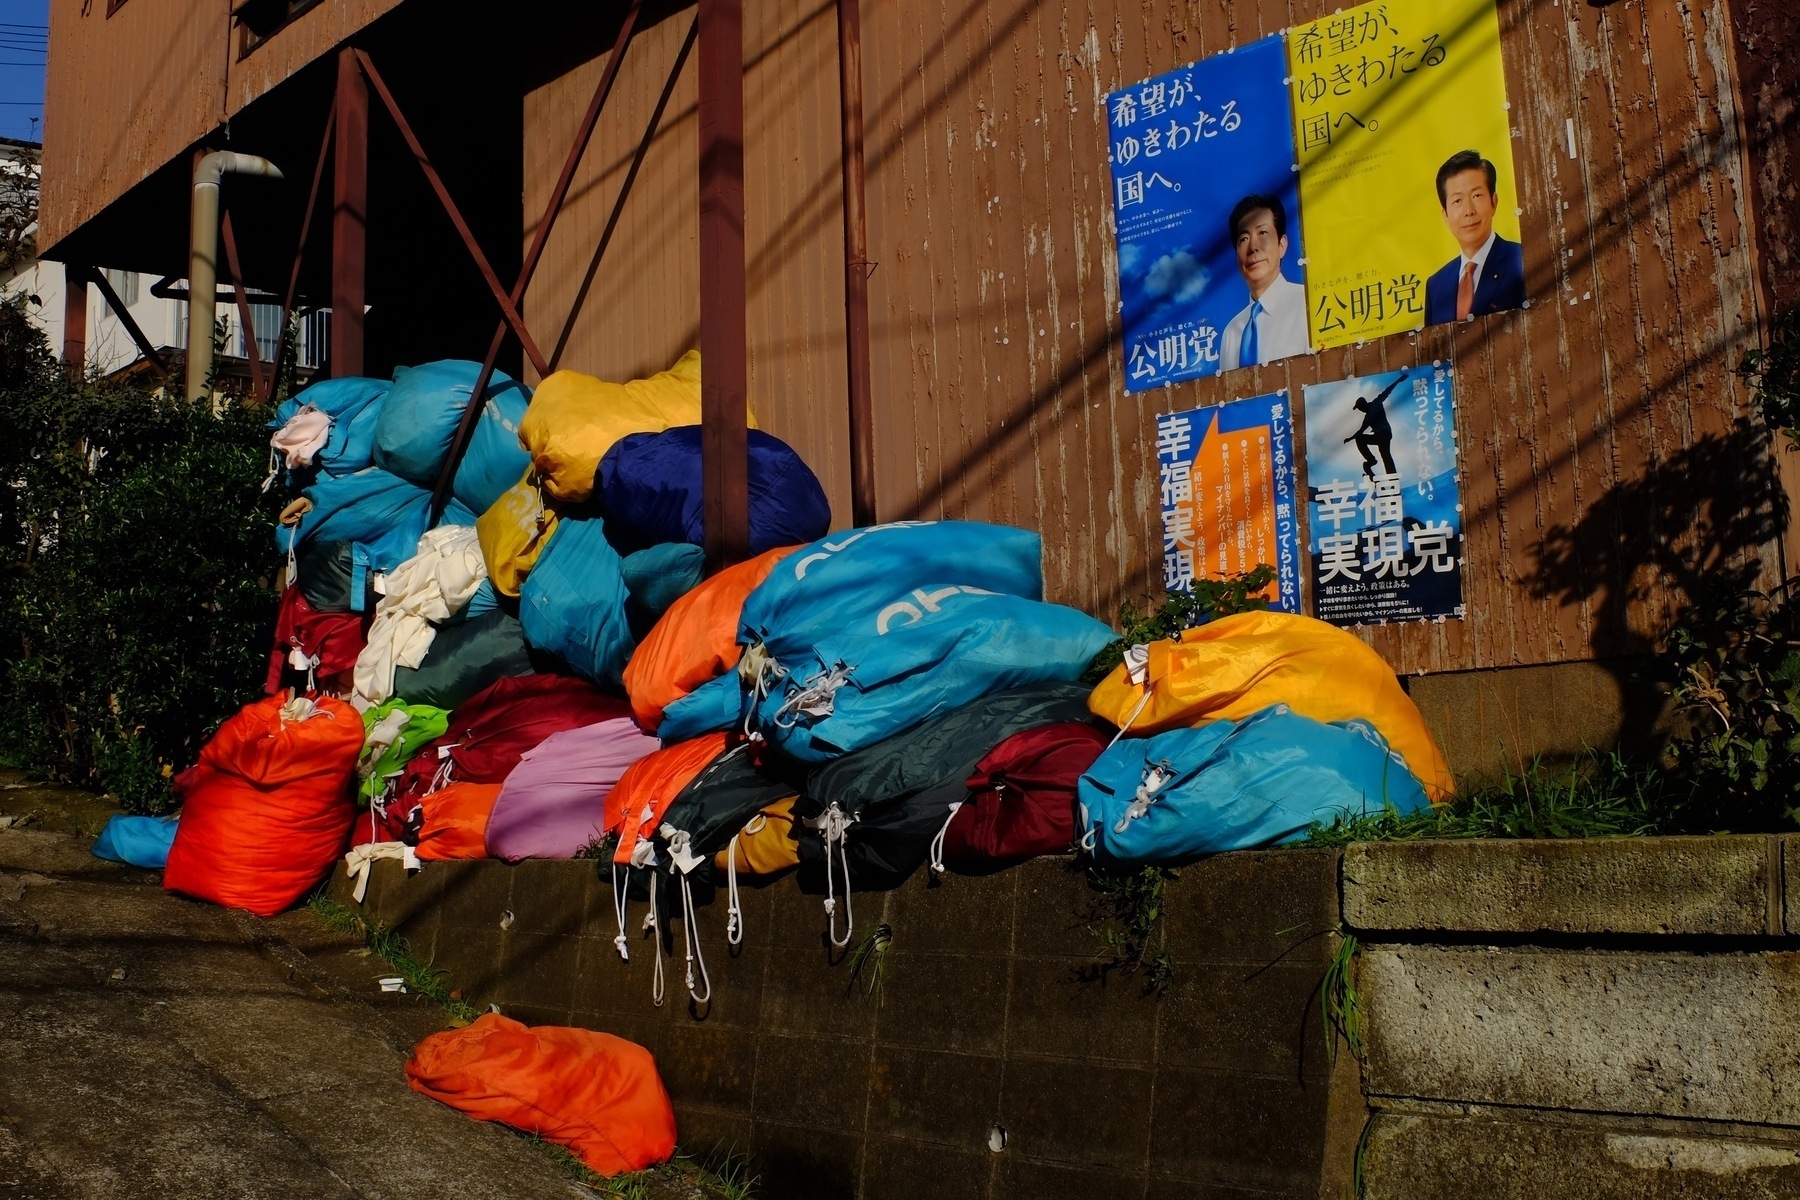 Colorful polyester laundry bags piled up on the side of a building in Totsuka Yokohama.